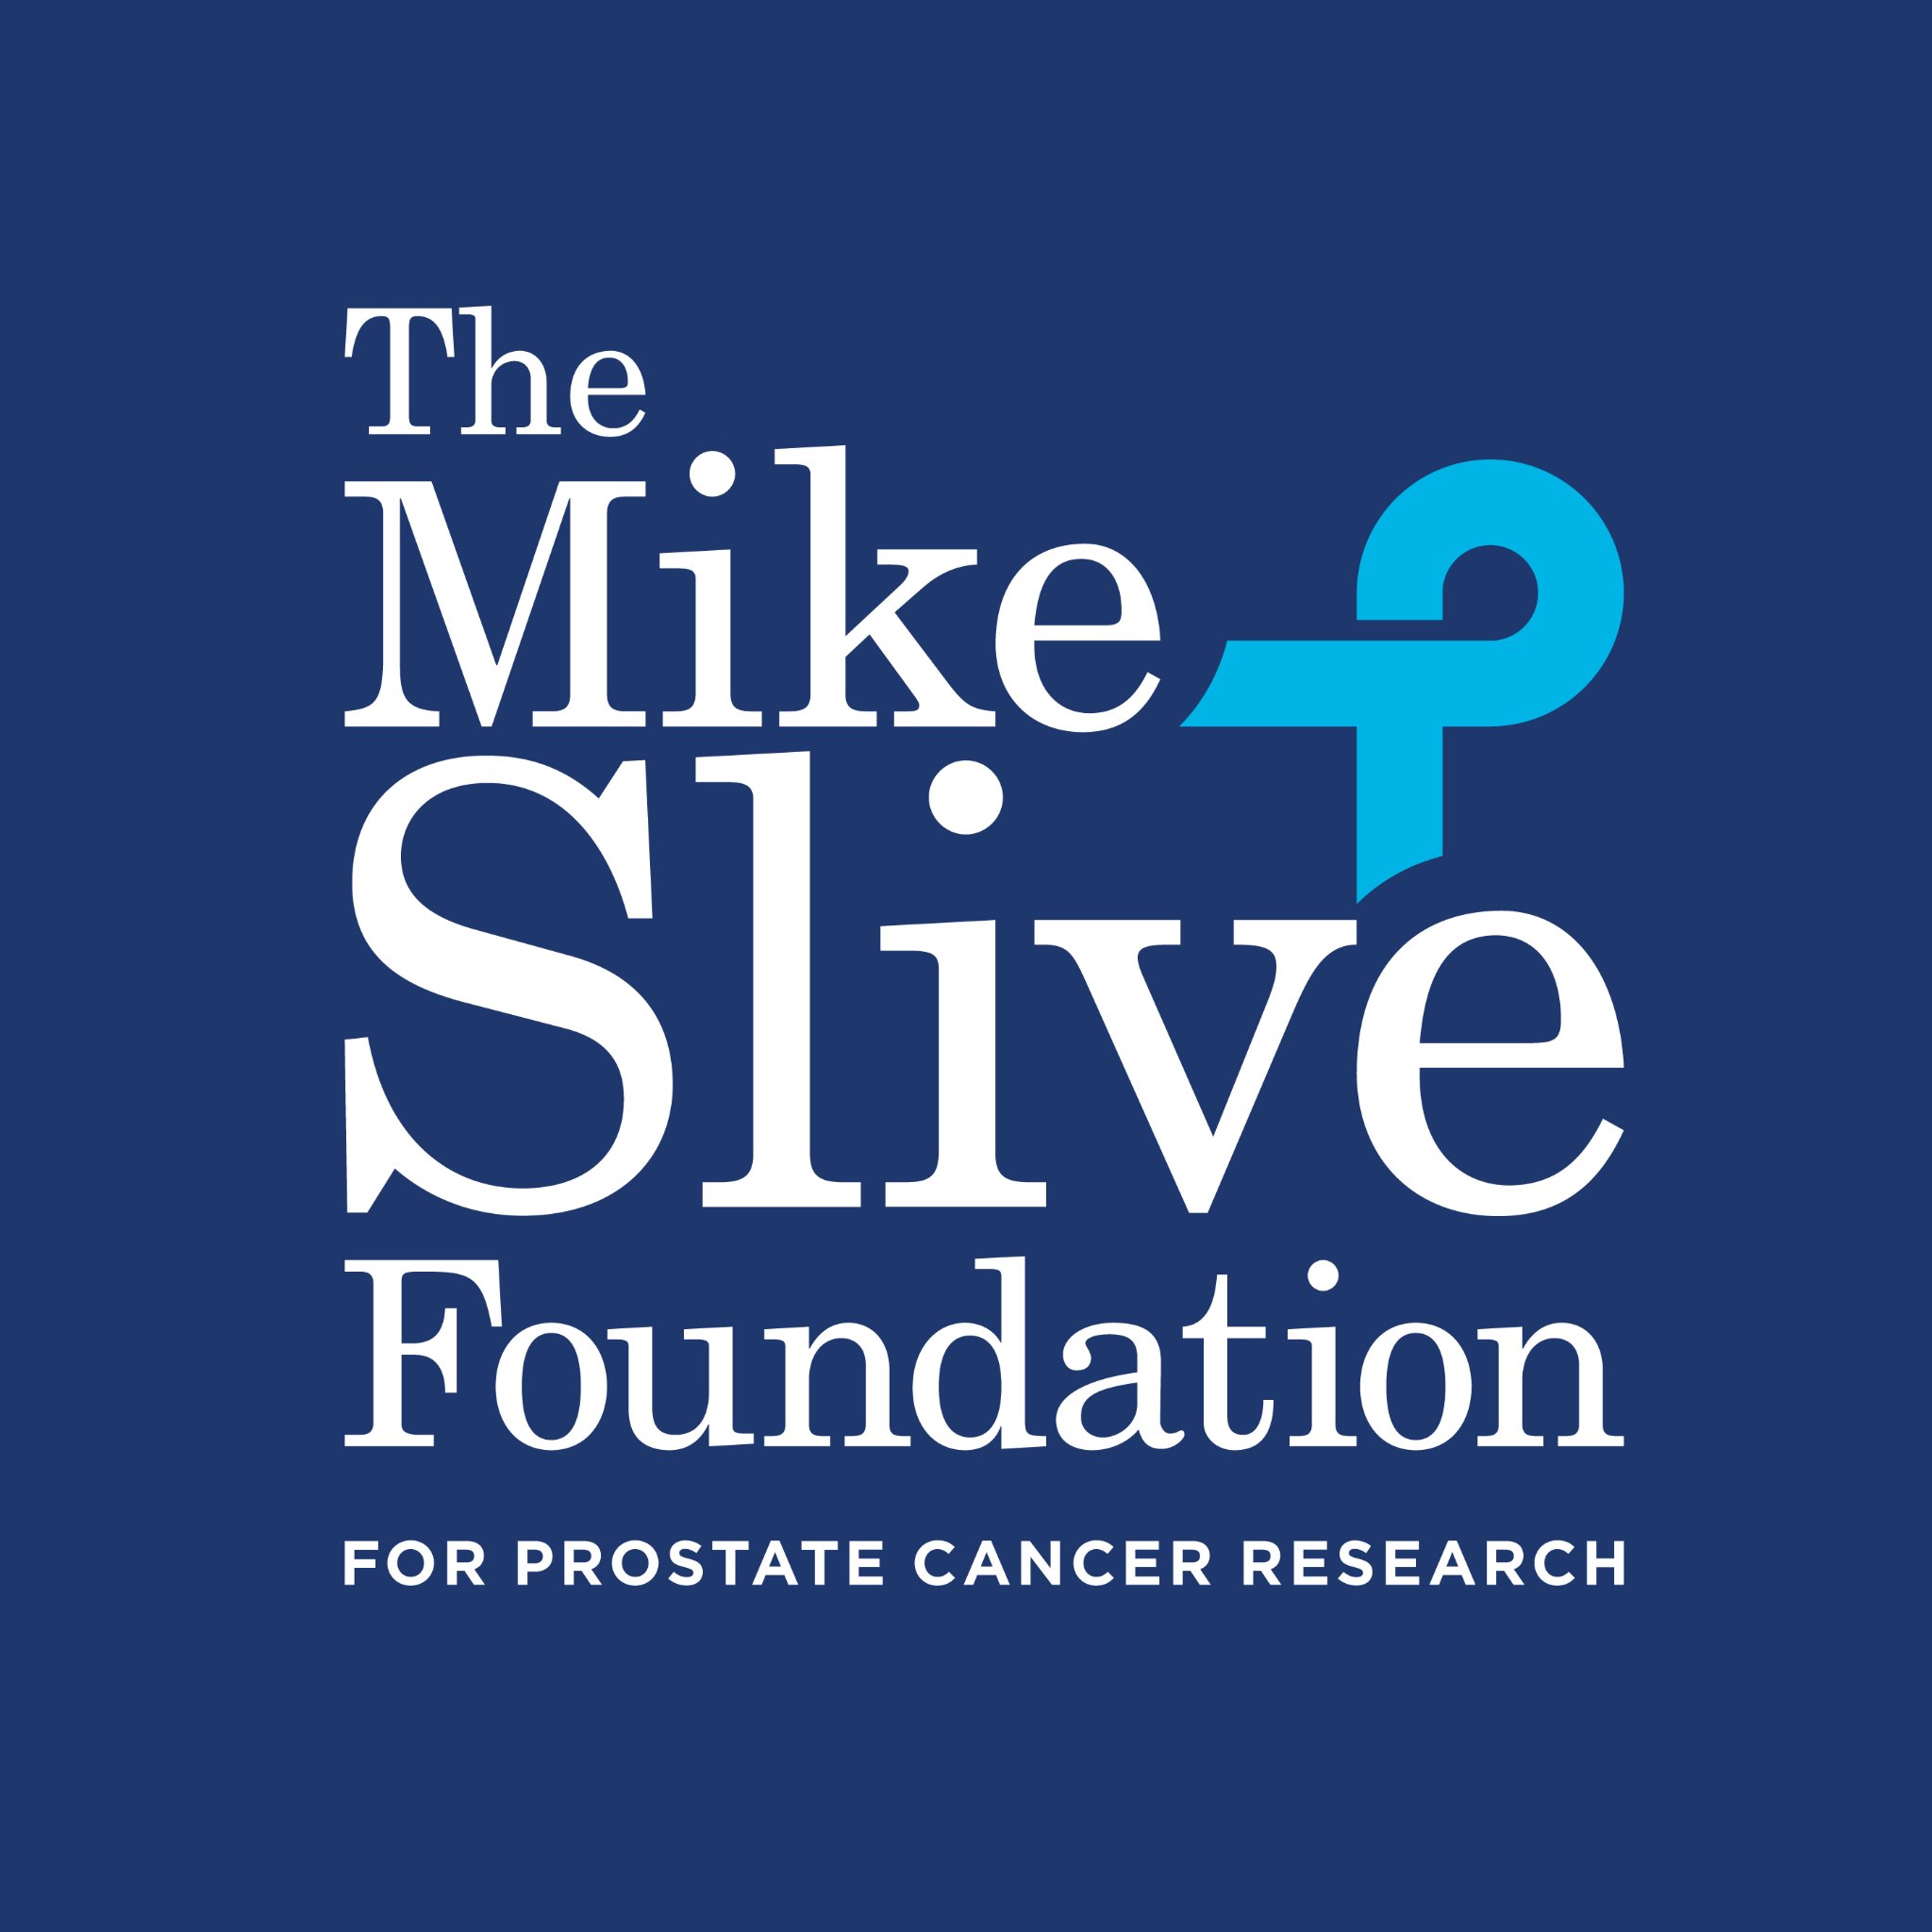 The mission of The Mike Slive Foundation is to save lives by funding cutting-edge prostate cancer research   https://t.co/MqO6qjpl0g